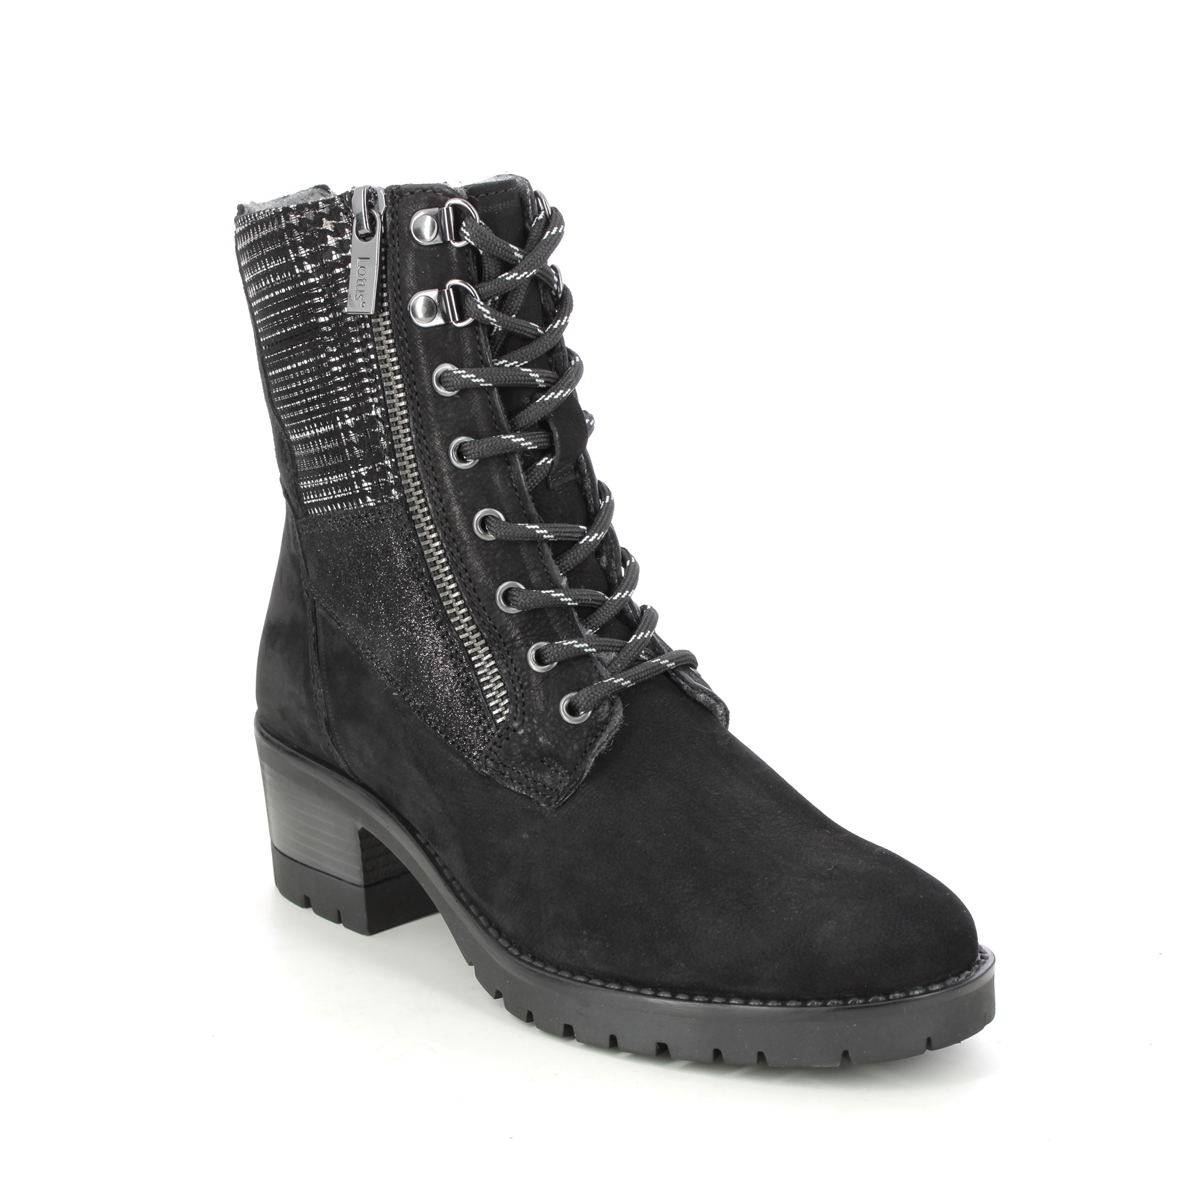 Lotus Oklahoma Crave Black leather Womens Lace Up Boots in a Plain Leather in Size 4